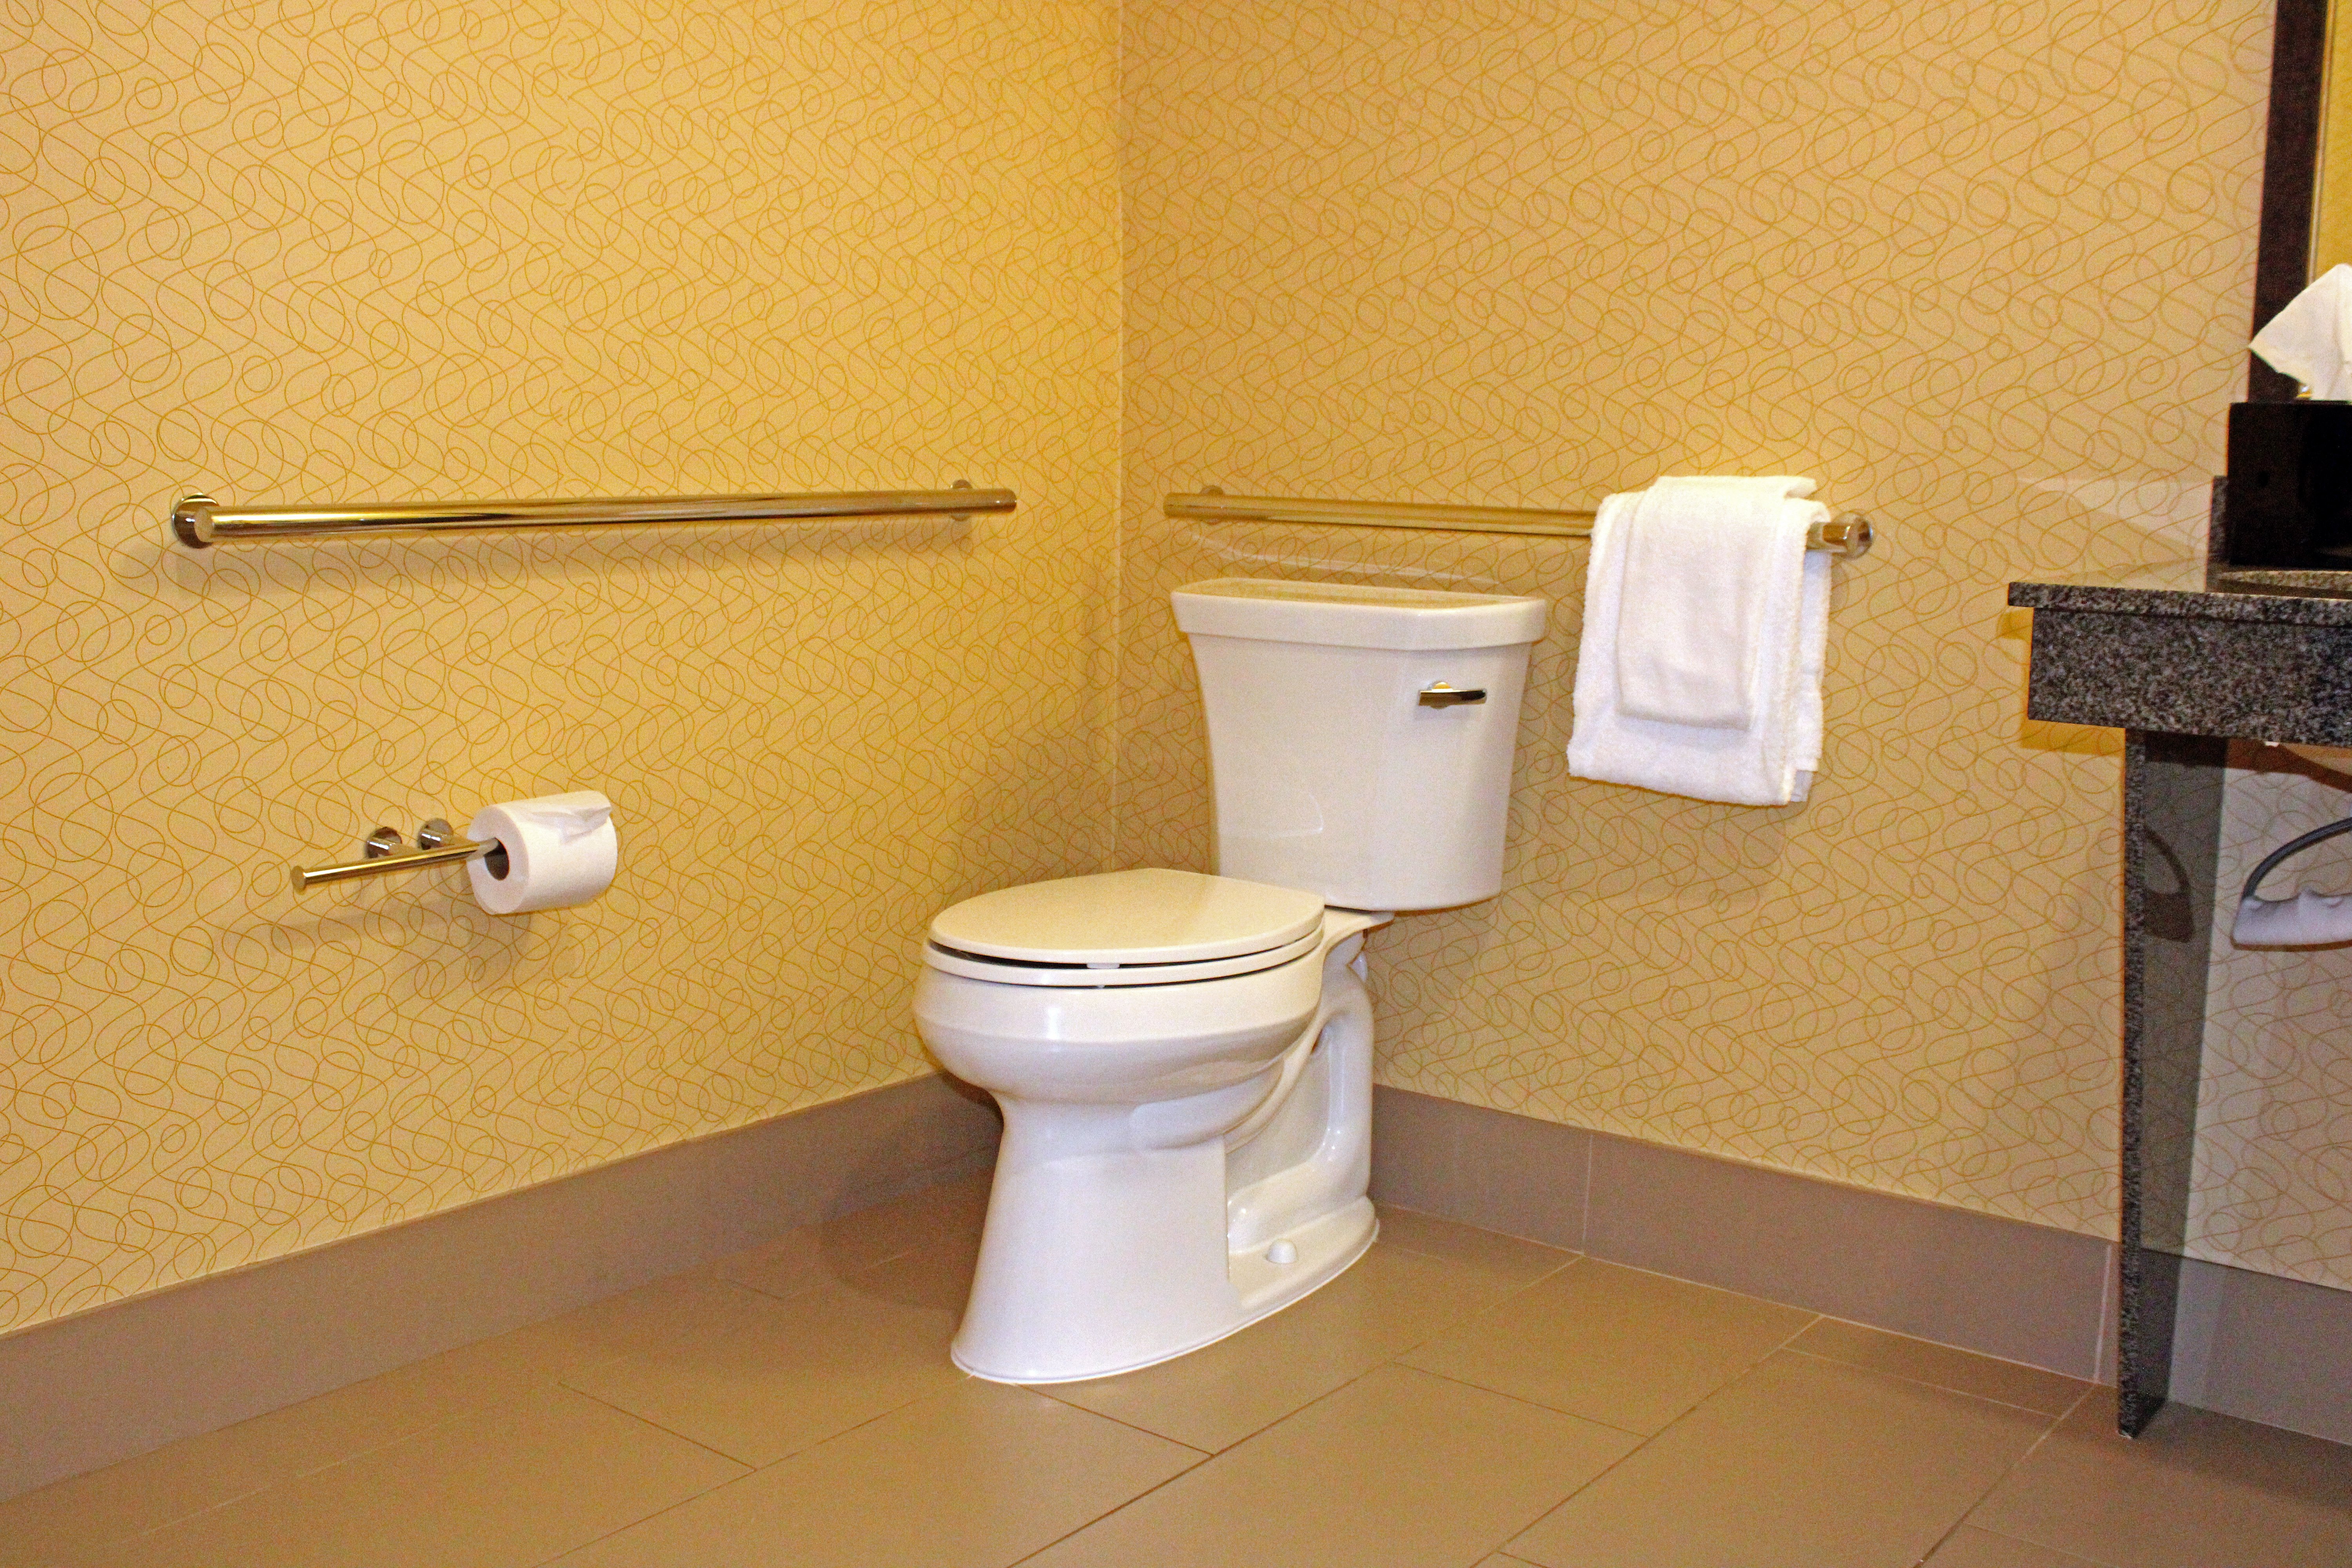 Wheelchair Accessible with grab bars near toilet